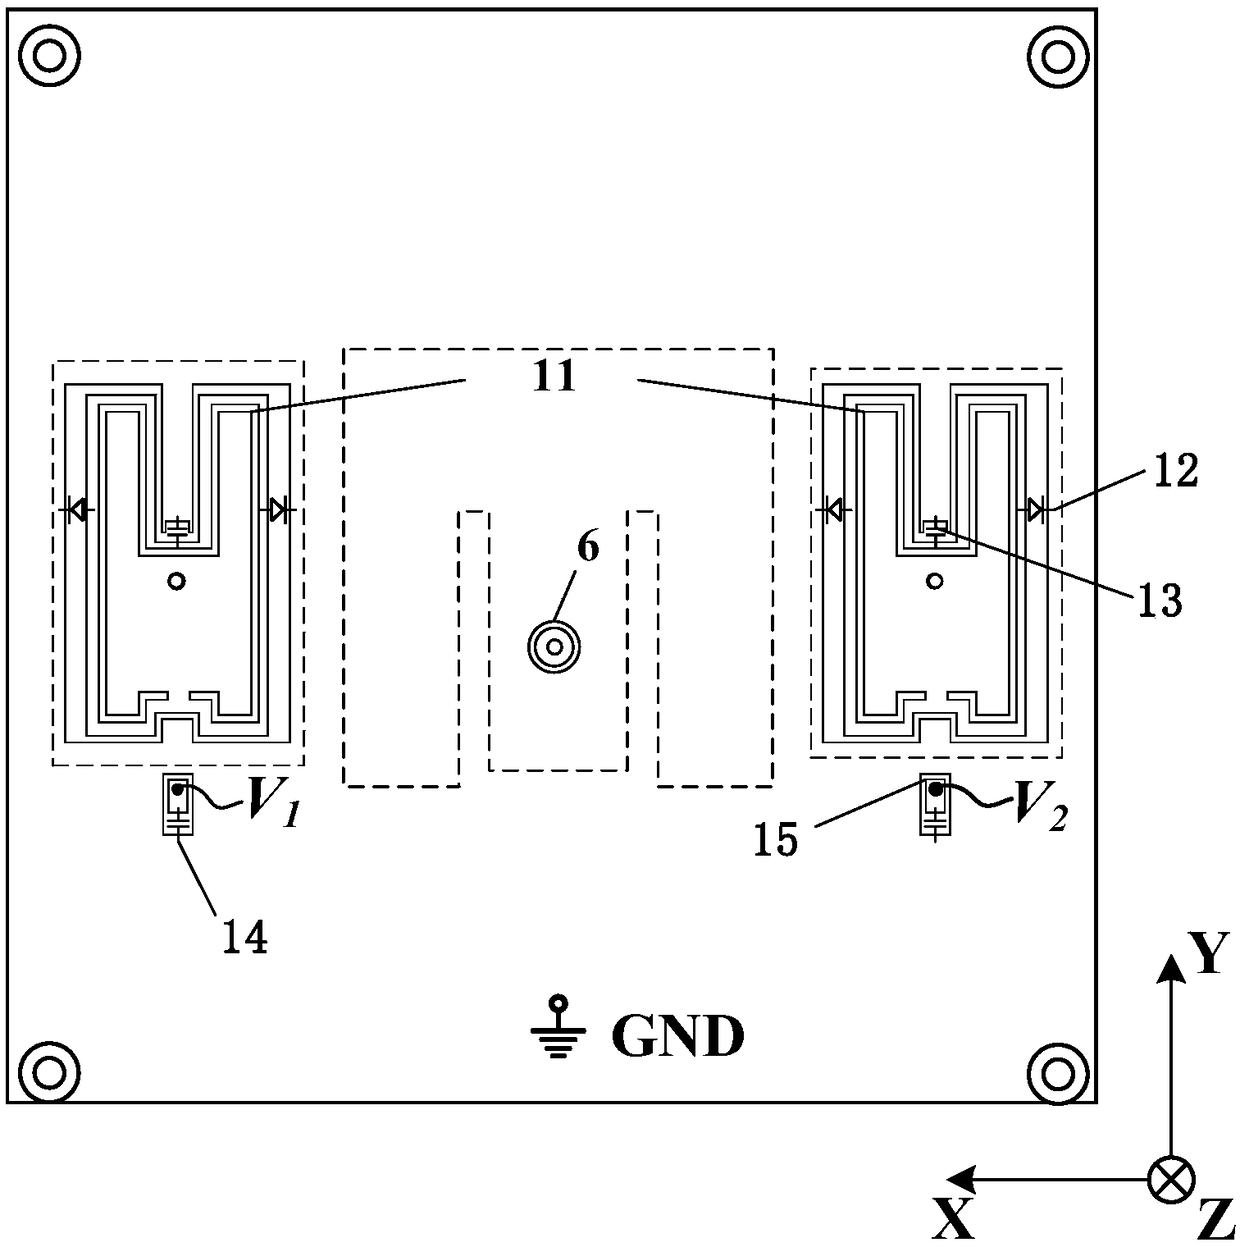 Small-size beam controllable patch antenna based on reconfigurable parasitic element